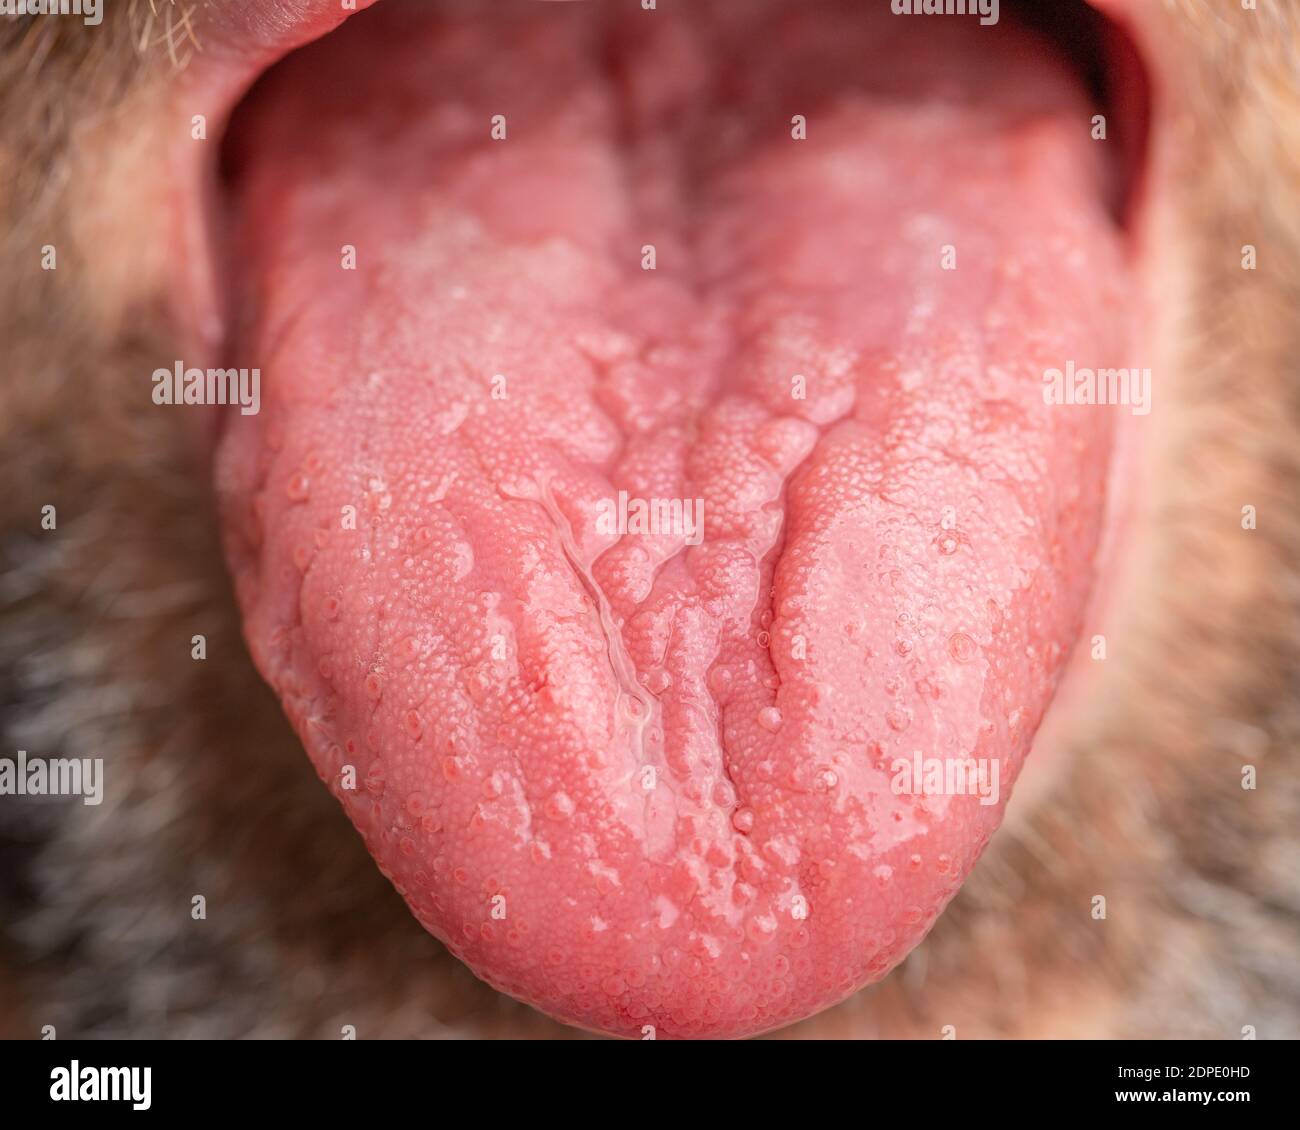 A white male with brown and white facial hair. Tongue is sticking out to show geographic tongue, also known as benign migratory glossitis. Stock Photo